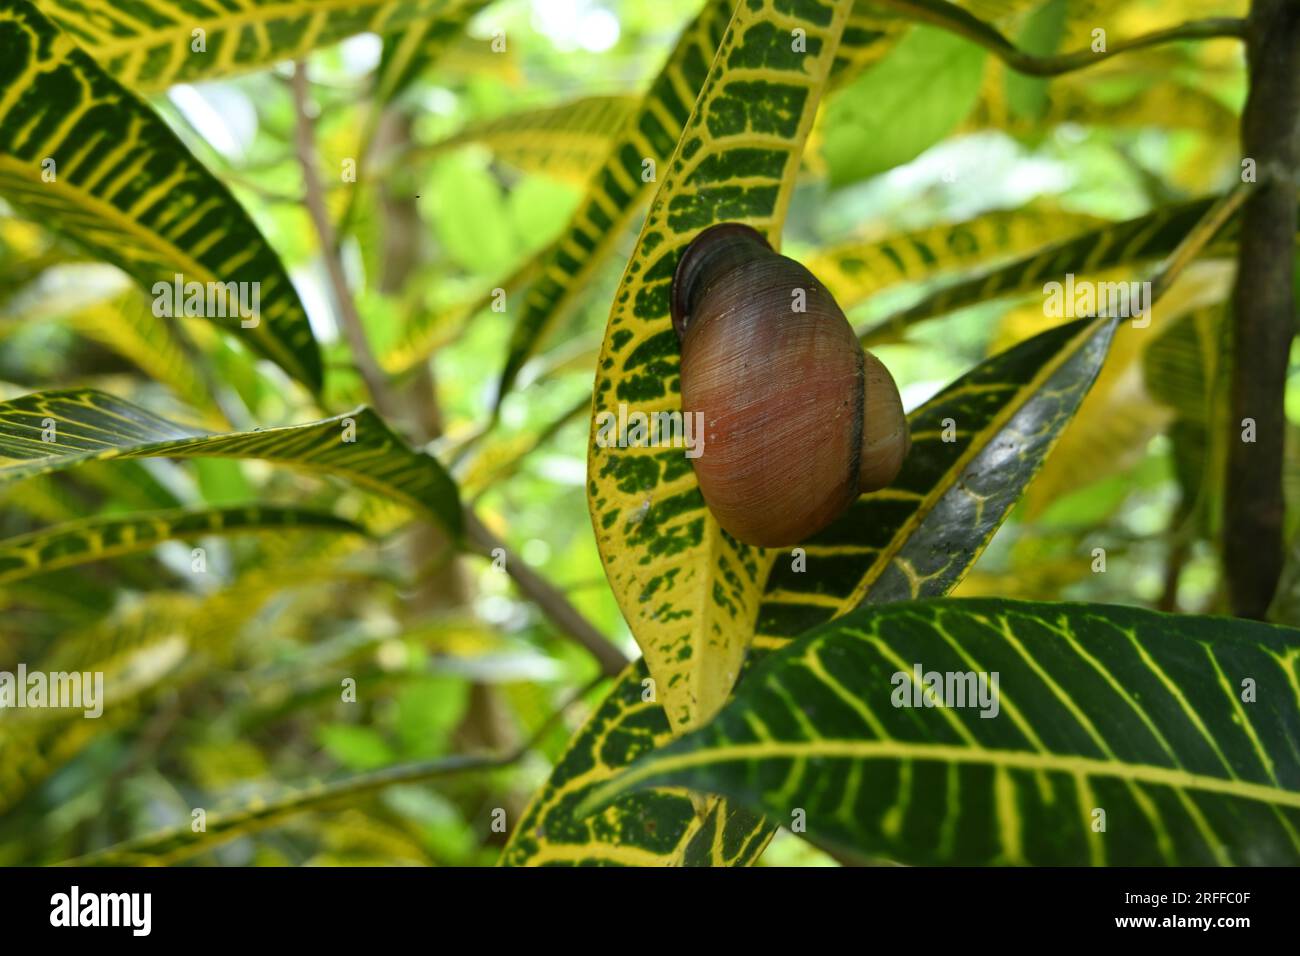 A Giant Land Snail (Acavus Phoenix) is sticking to a yellow and green color variegated Croton leaf (Codiaeum Variegatum) Stock Photo